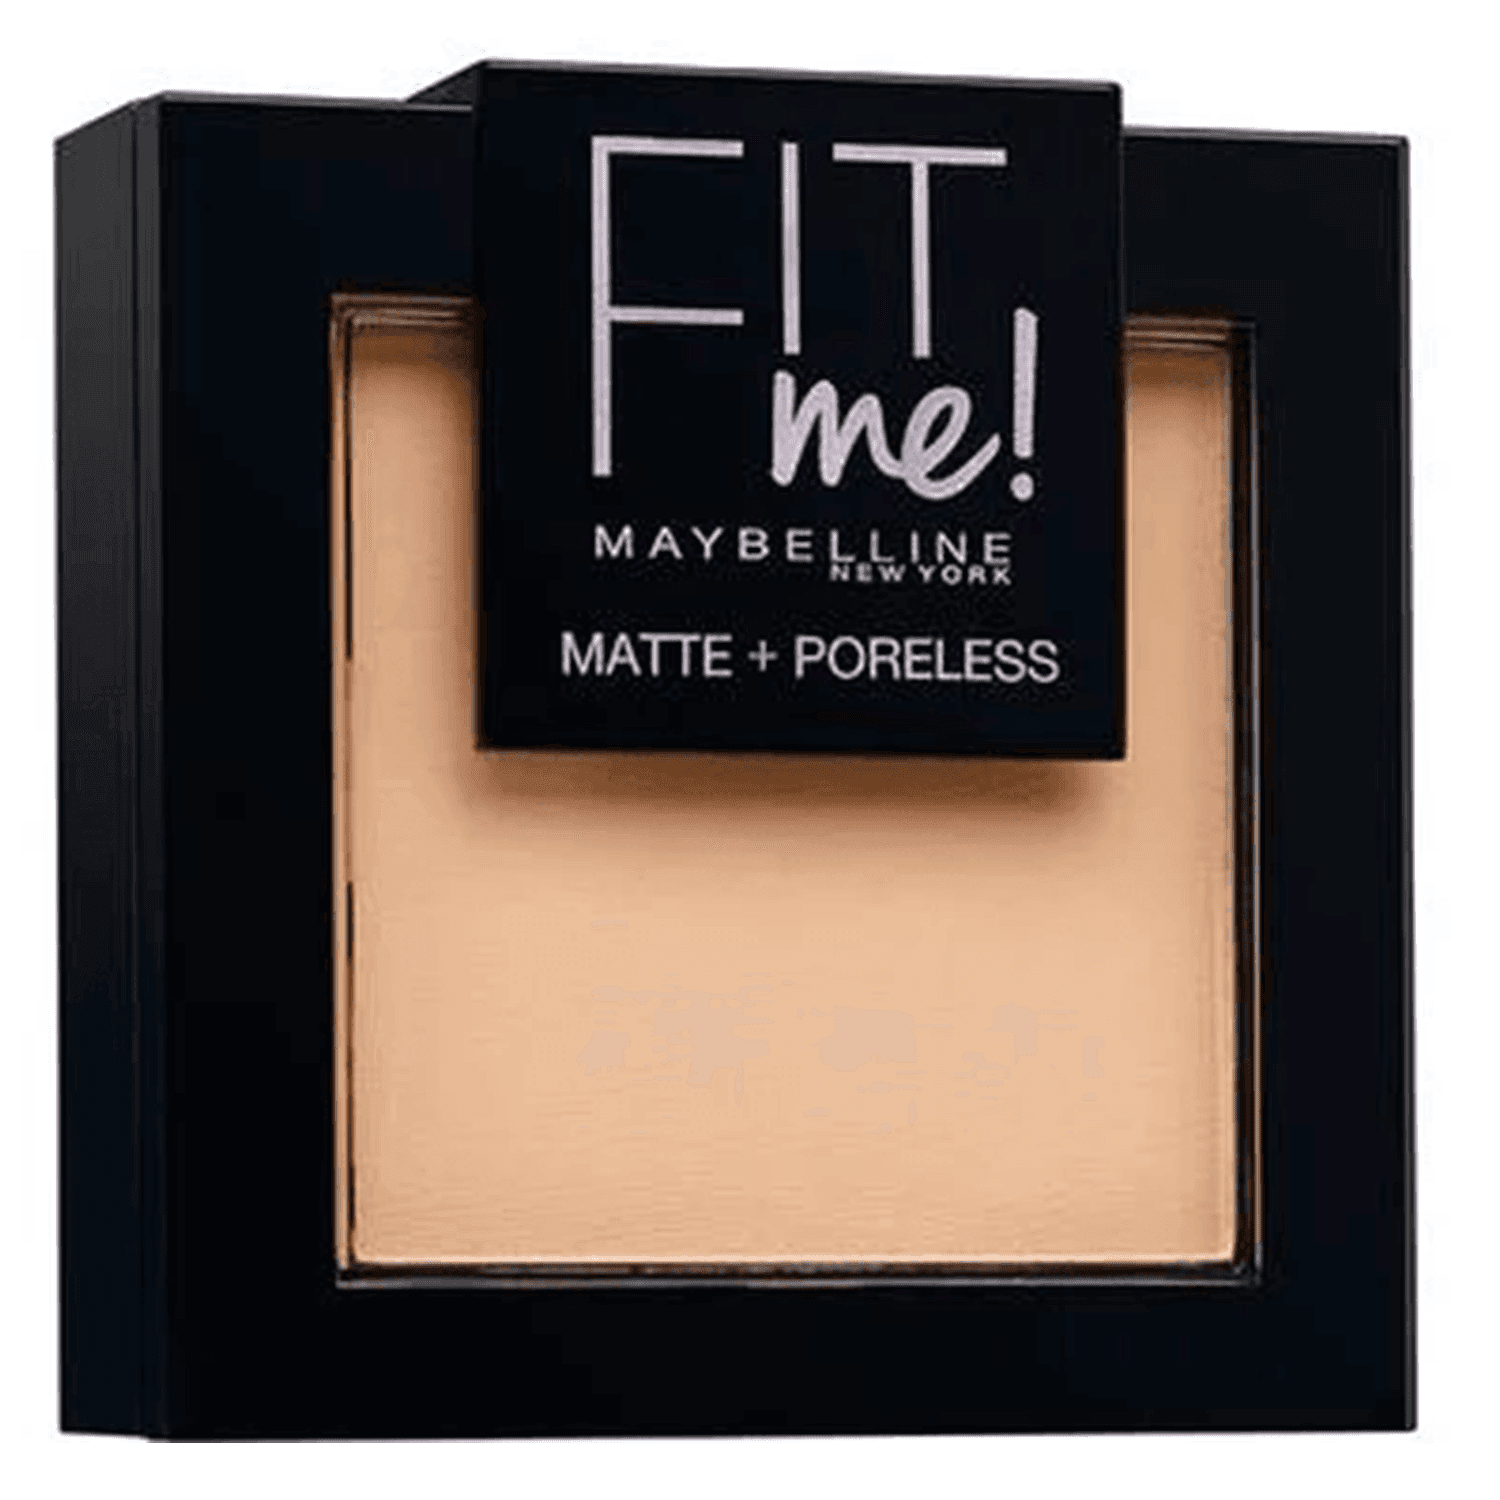 Maybelline NY Teint - Fit Me! Matte + Poreless Puder Nr. 115 Ivory